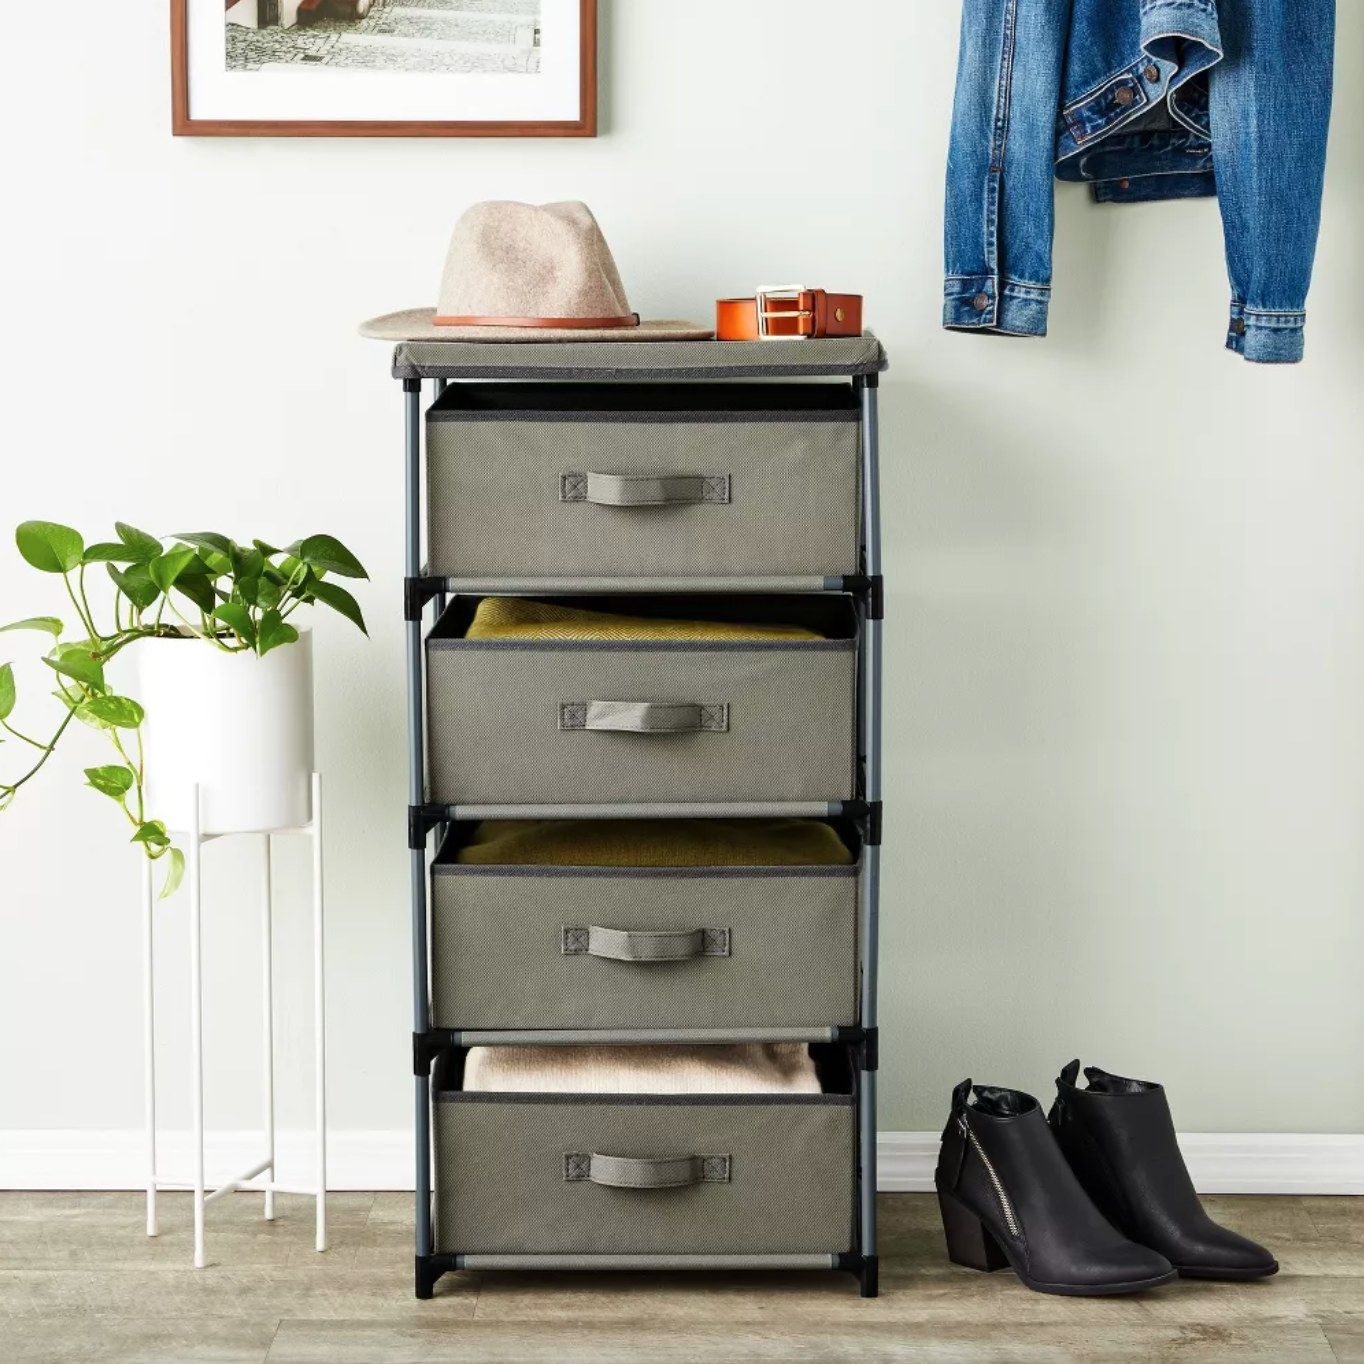 the black and green stack of drawers with various clothes and accessories